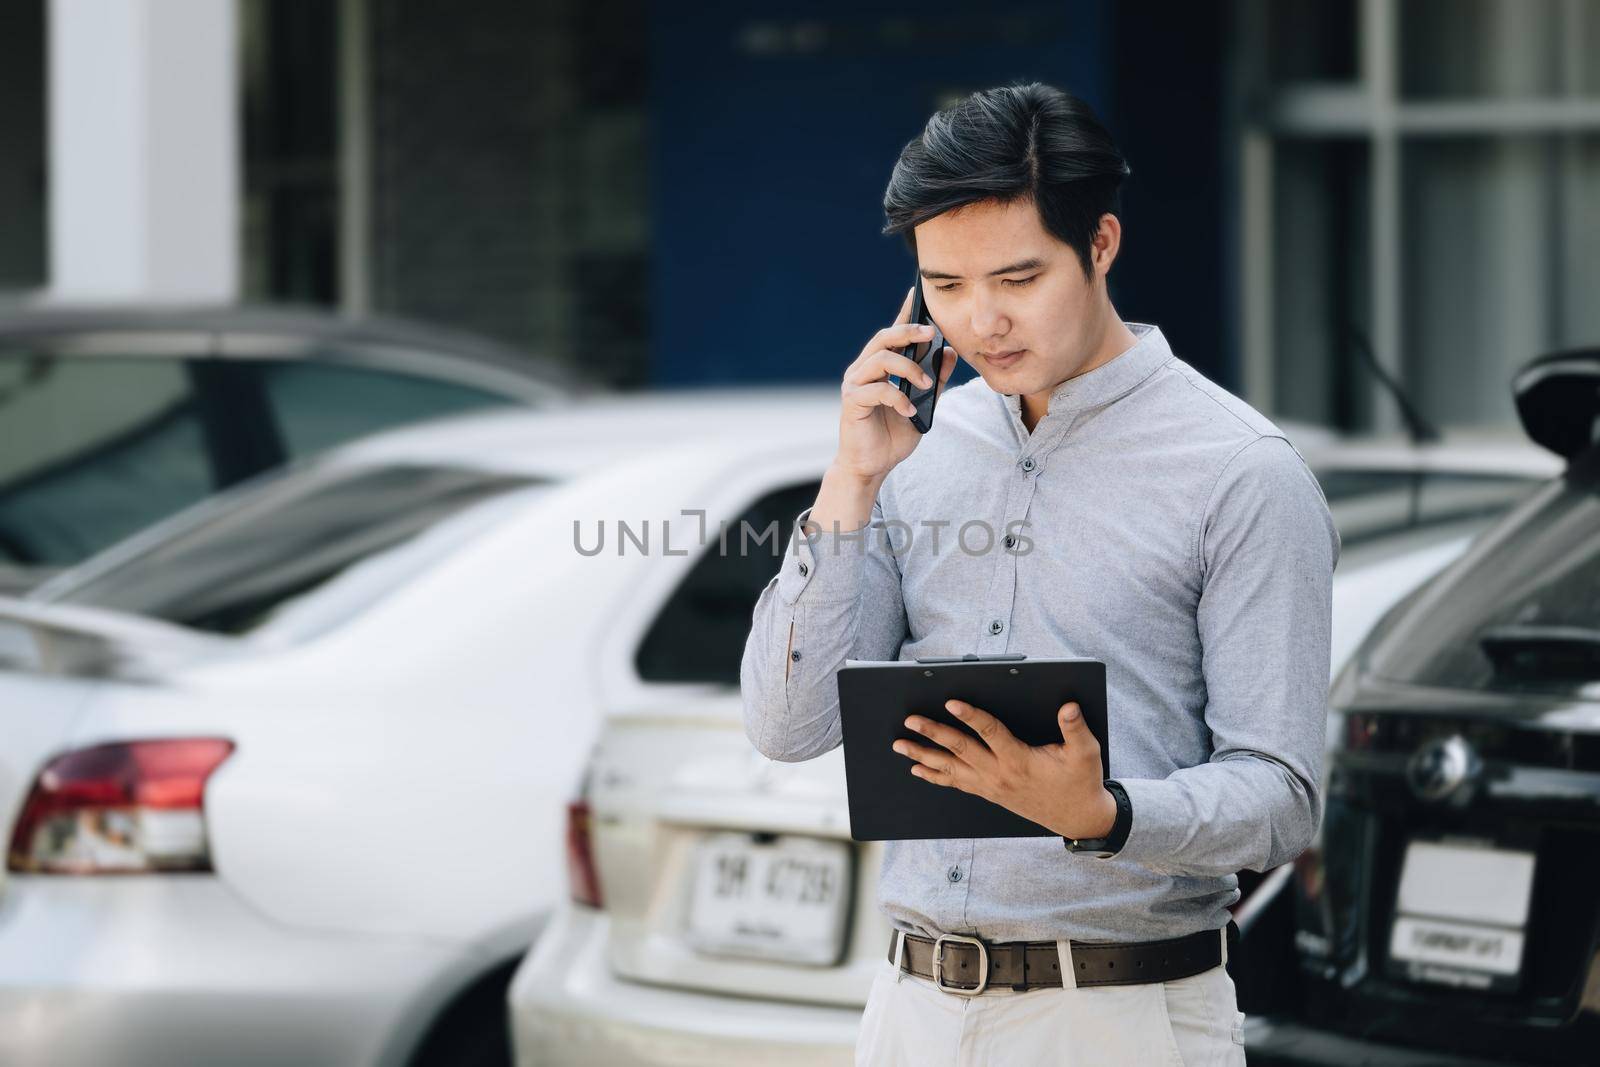 Insurance claim concept, car insurance policy owner talking on the phone with car insurance company holding insurance documents to inform car repair